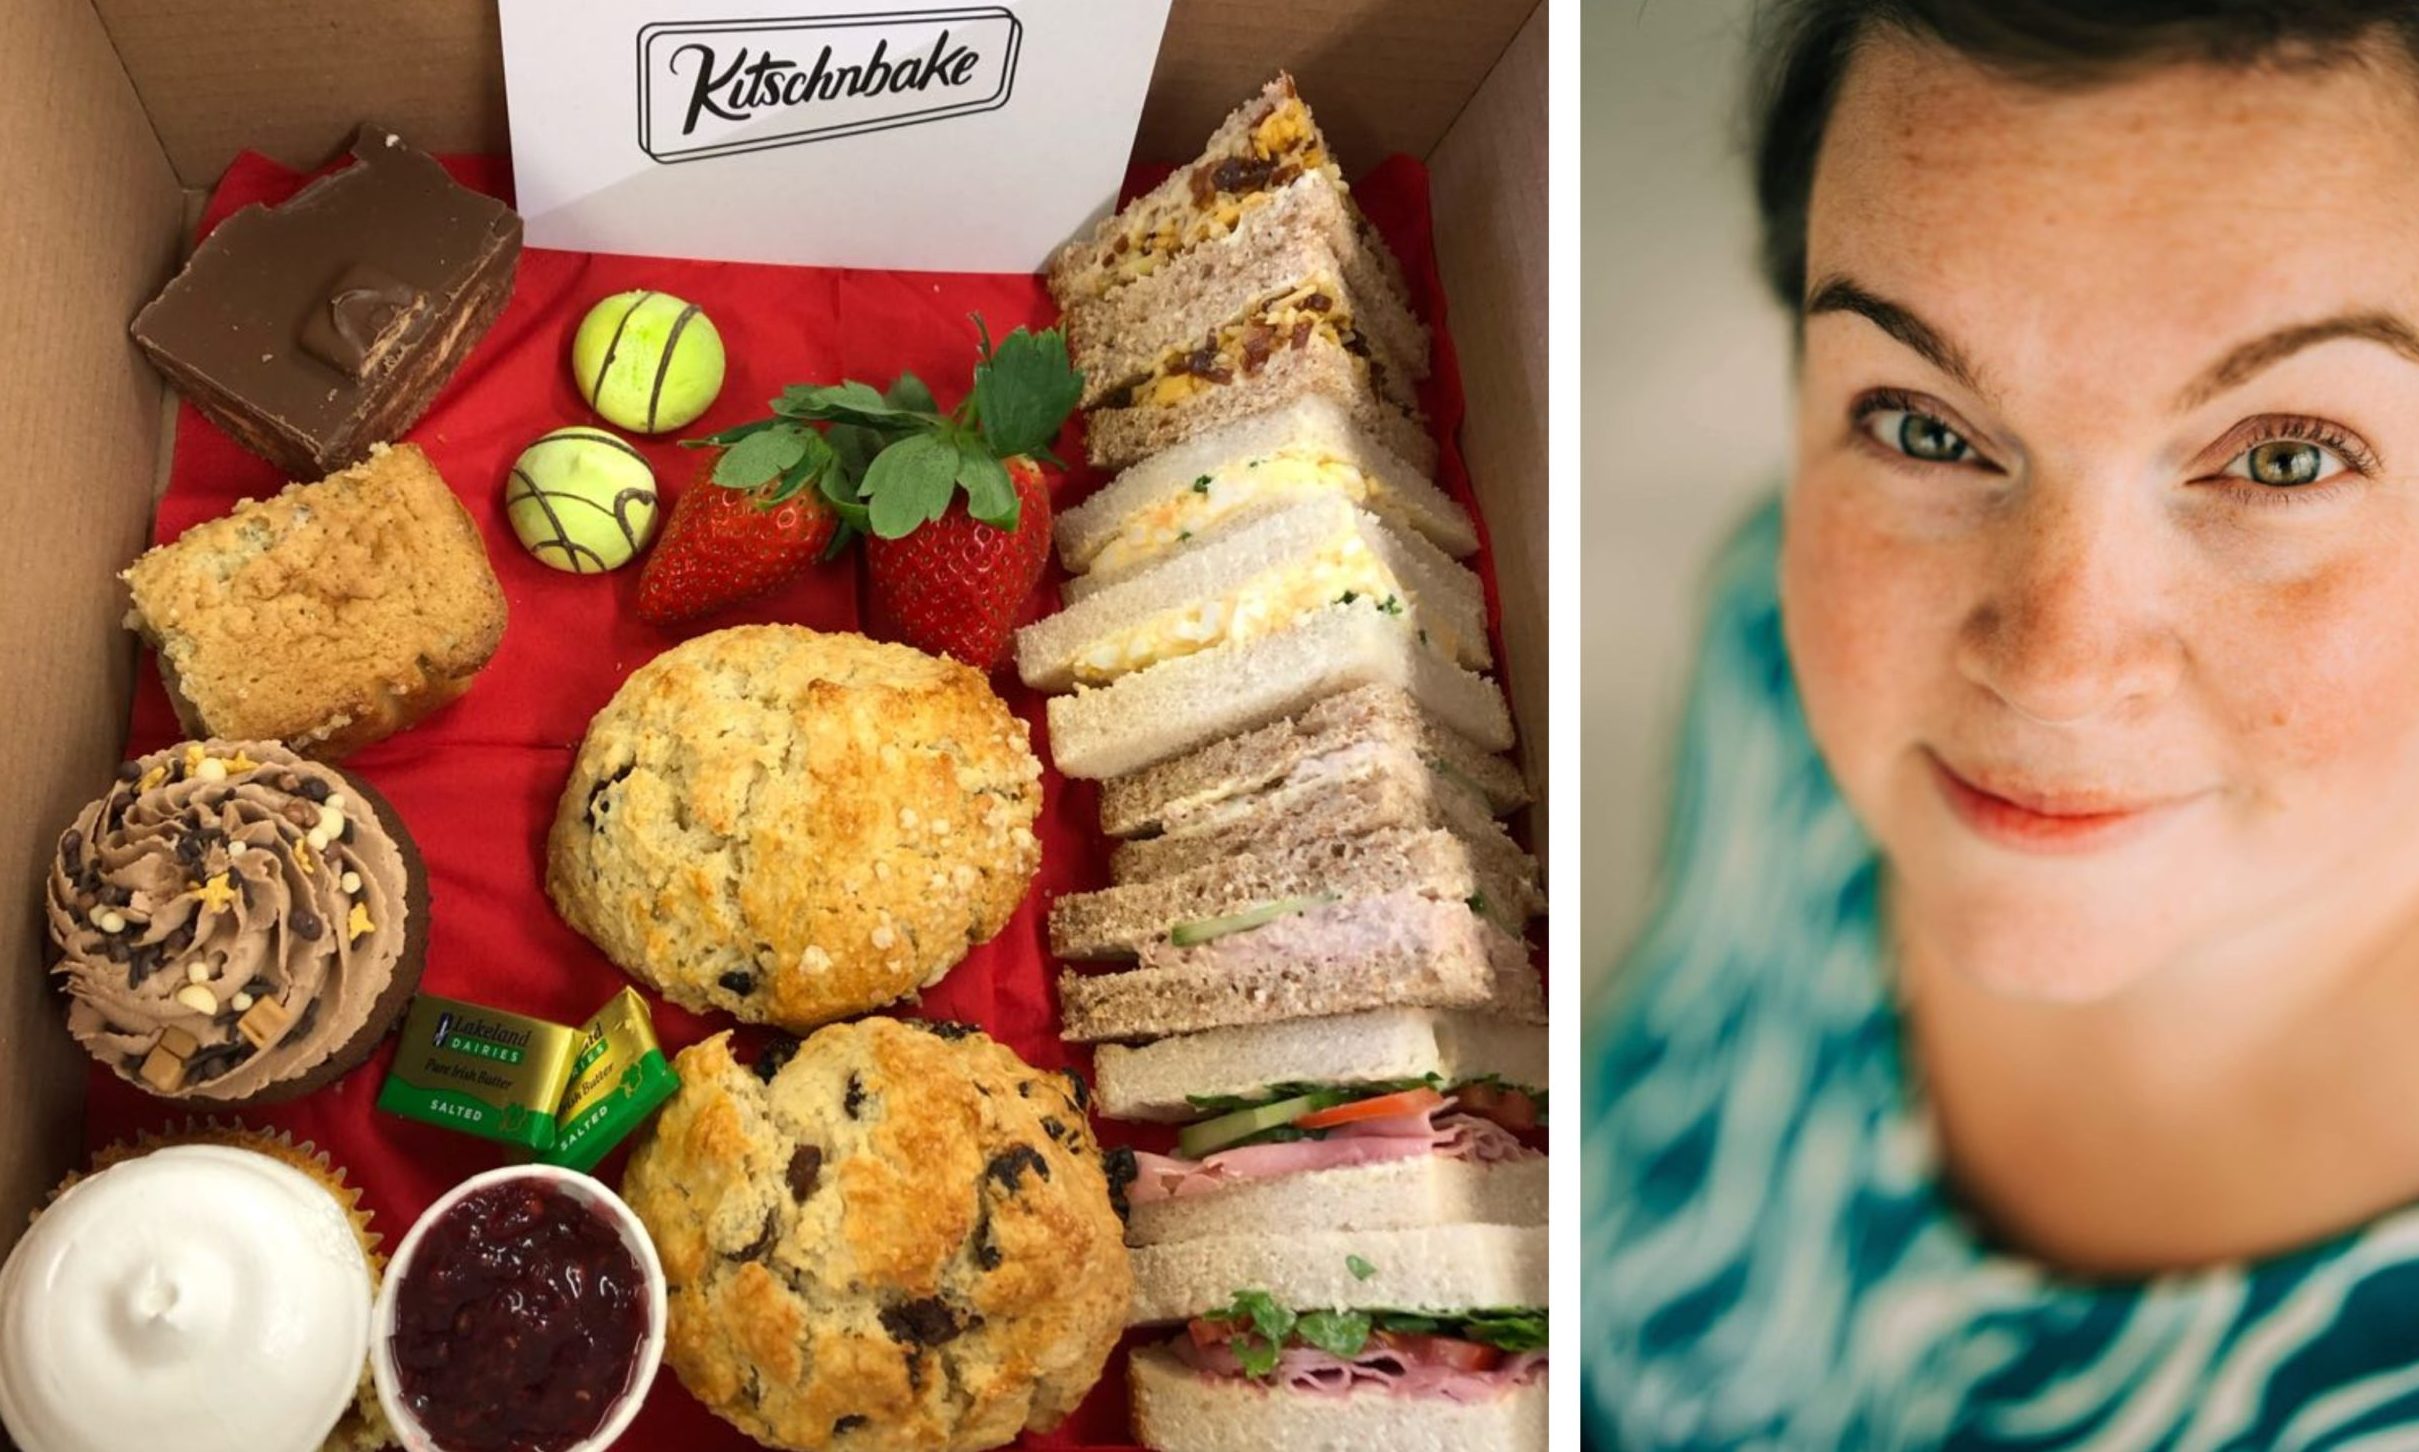 Mary-Jane Duncan, owner of KitscnBake. and an afternoon 'tea in a box' for Mother's Day.